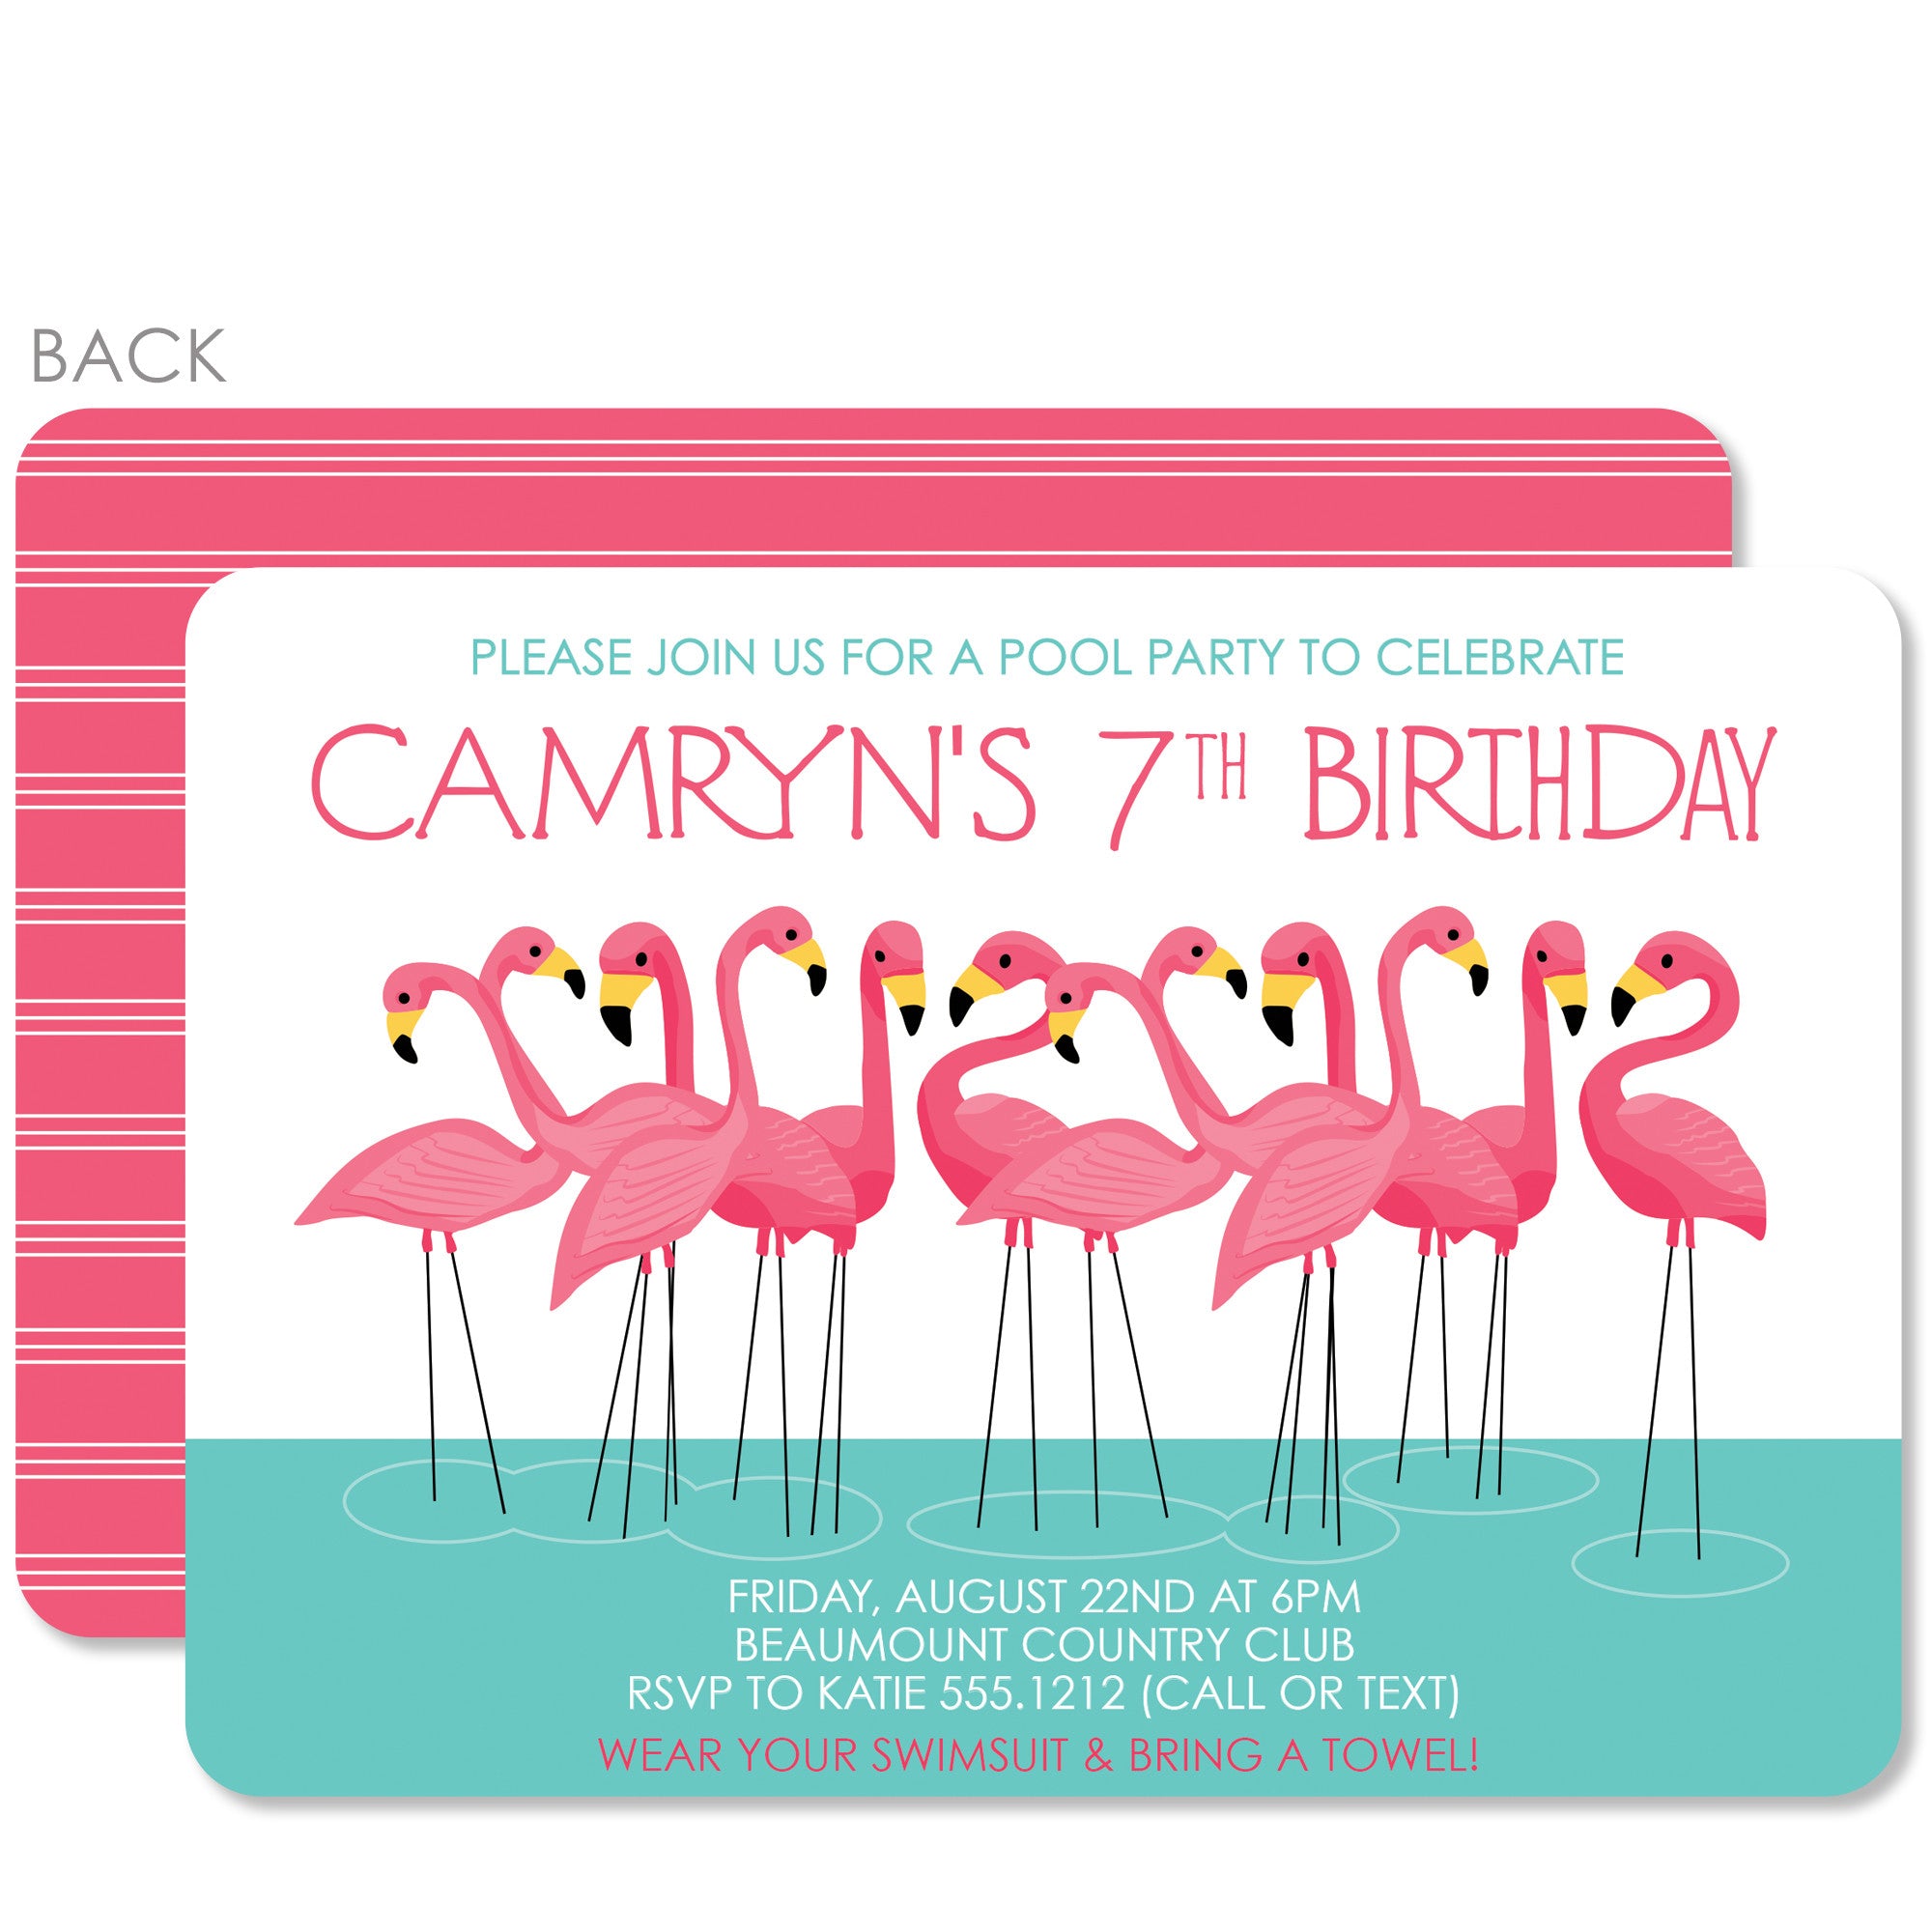 Flamingo Party Birthday Invitation, perfect for a pool party or splash party, printed on heavyweight premium cardstock, from Pipsy.com